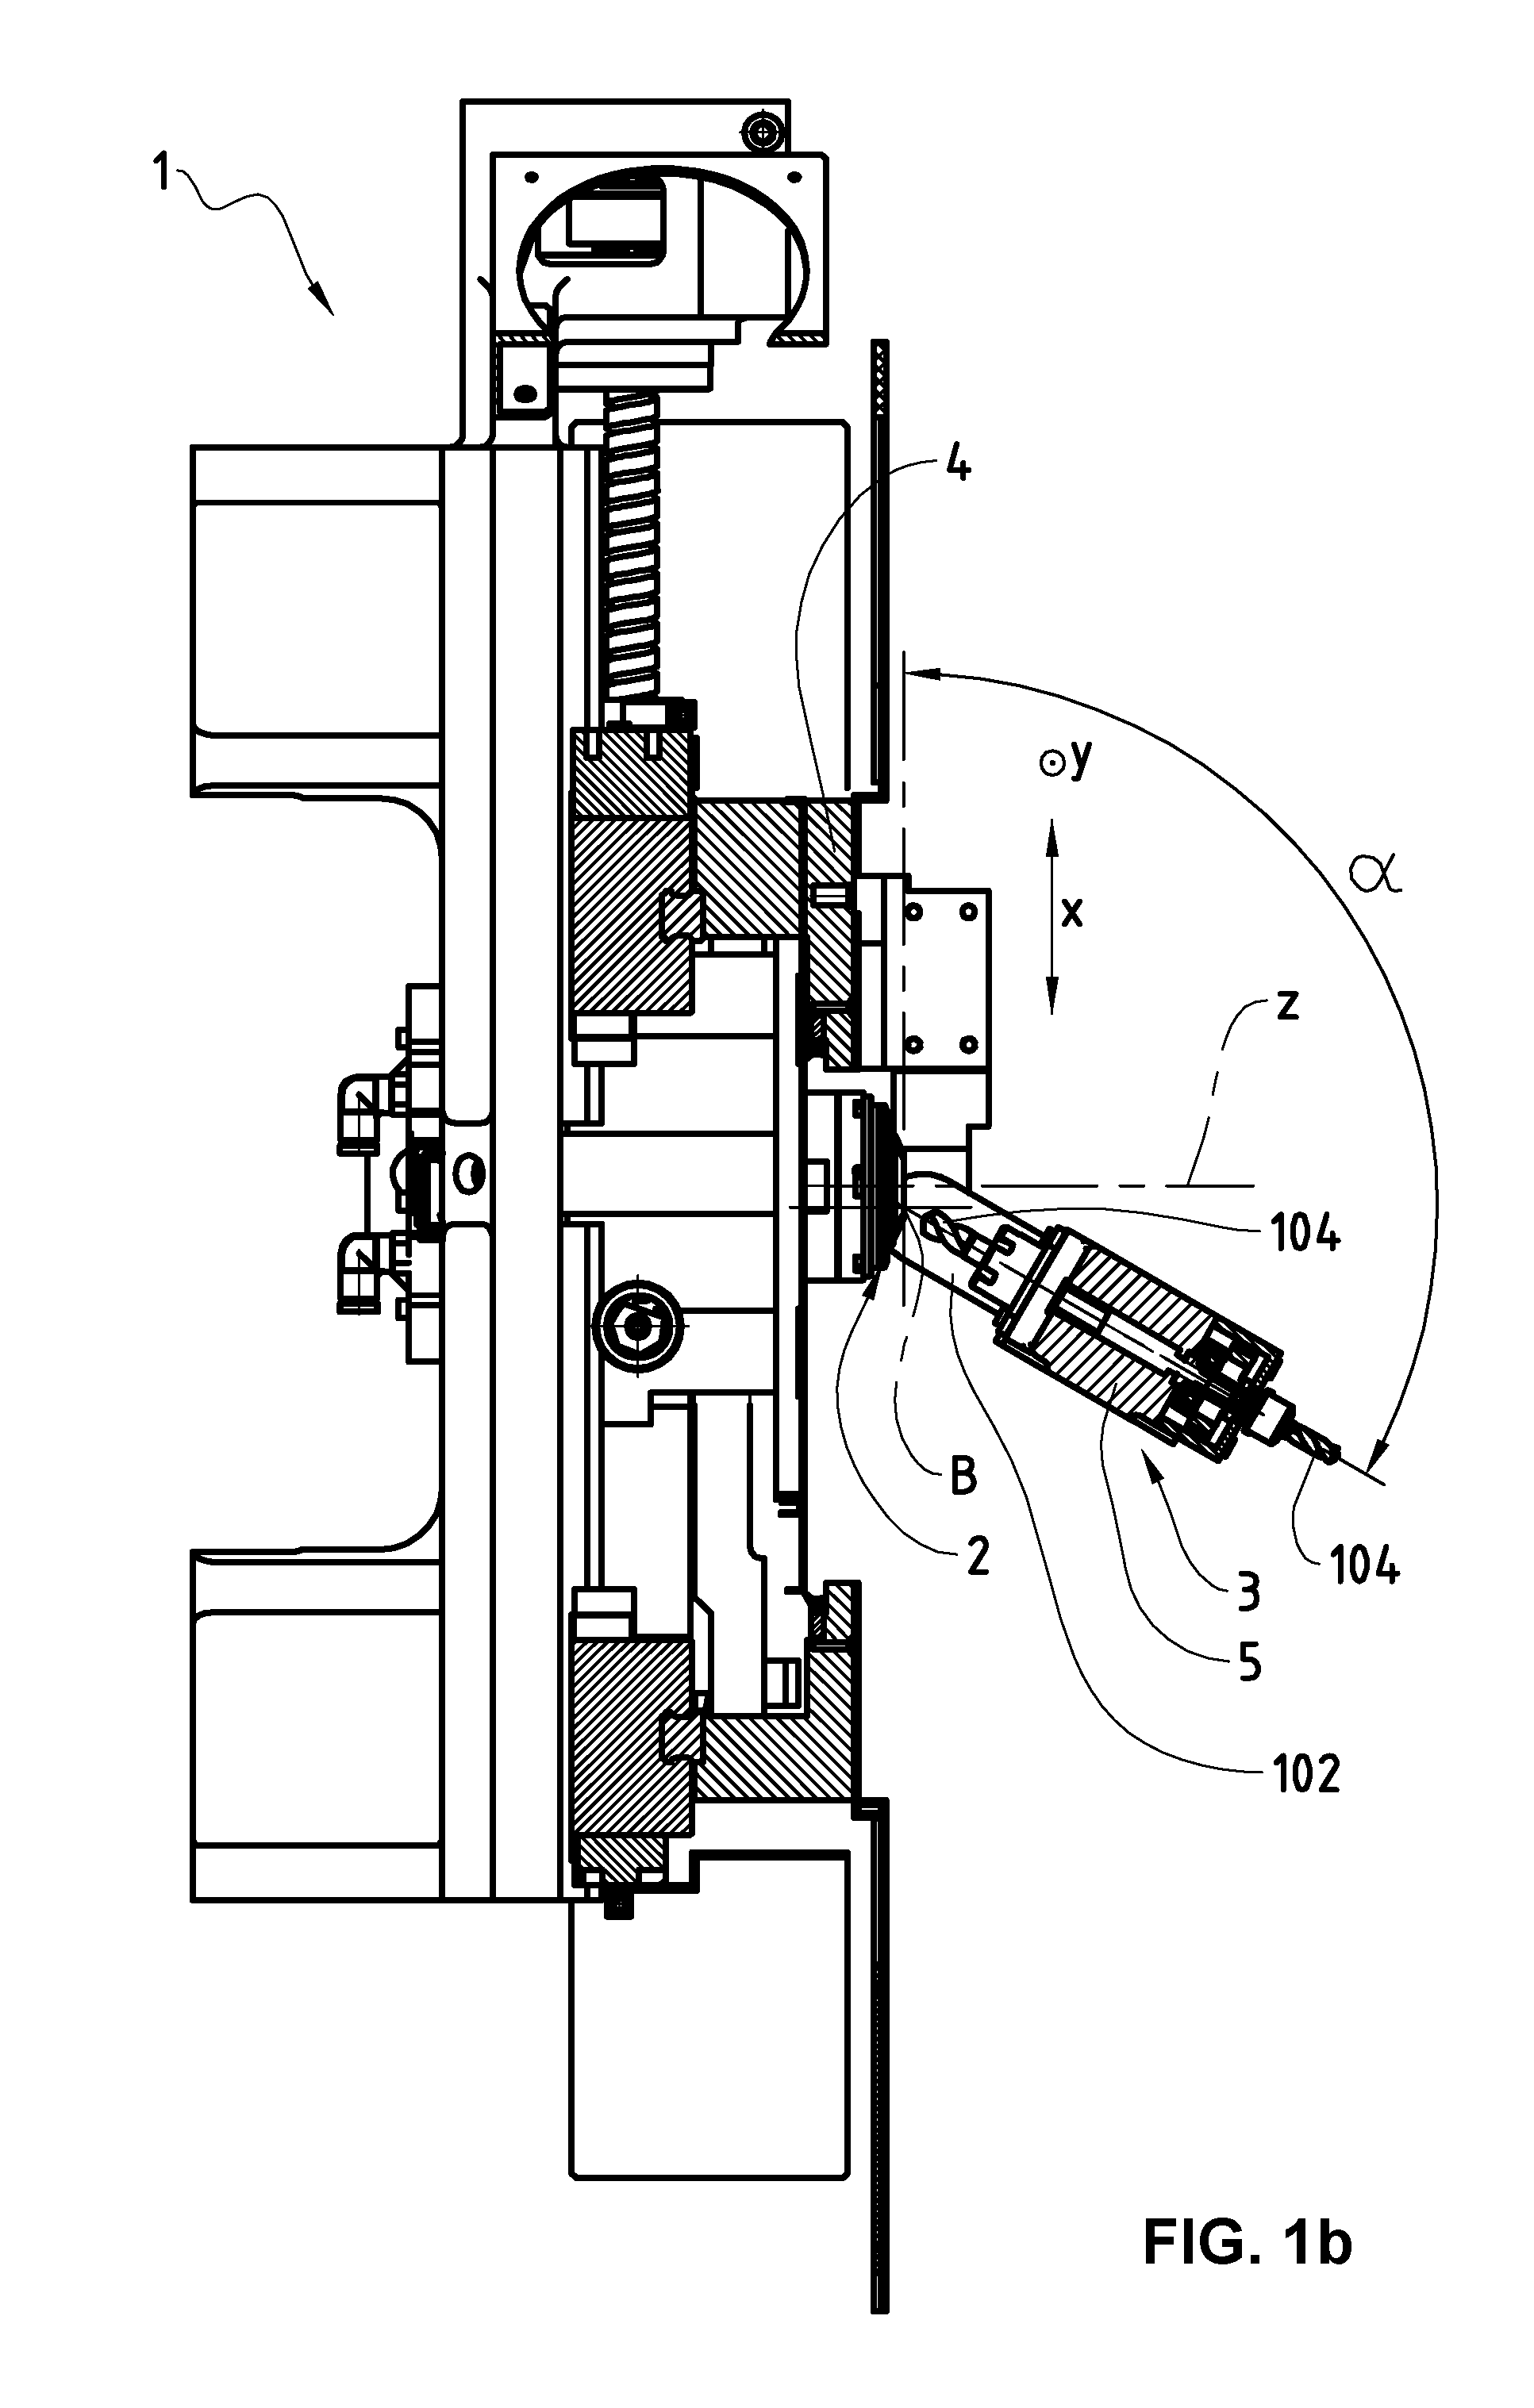 Equipment with a detachable accessory and assembly for a machining lathe, and machining lathe with digital control